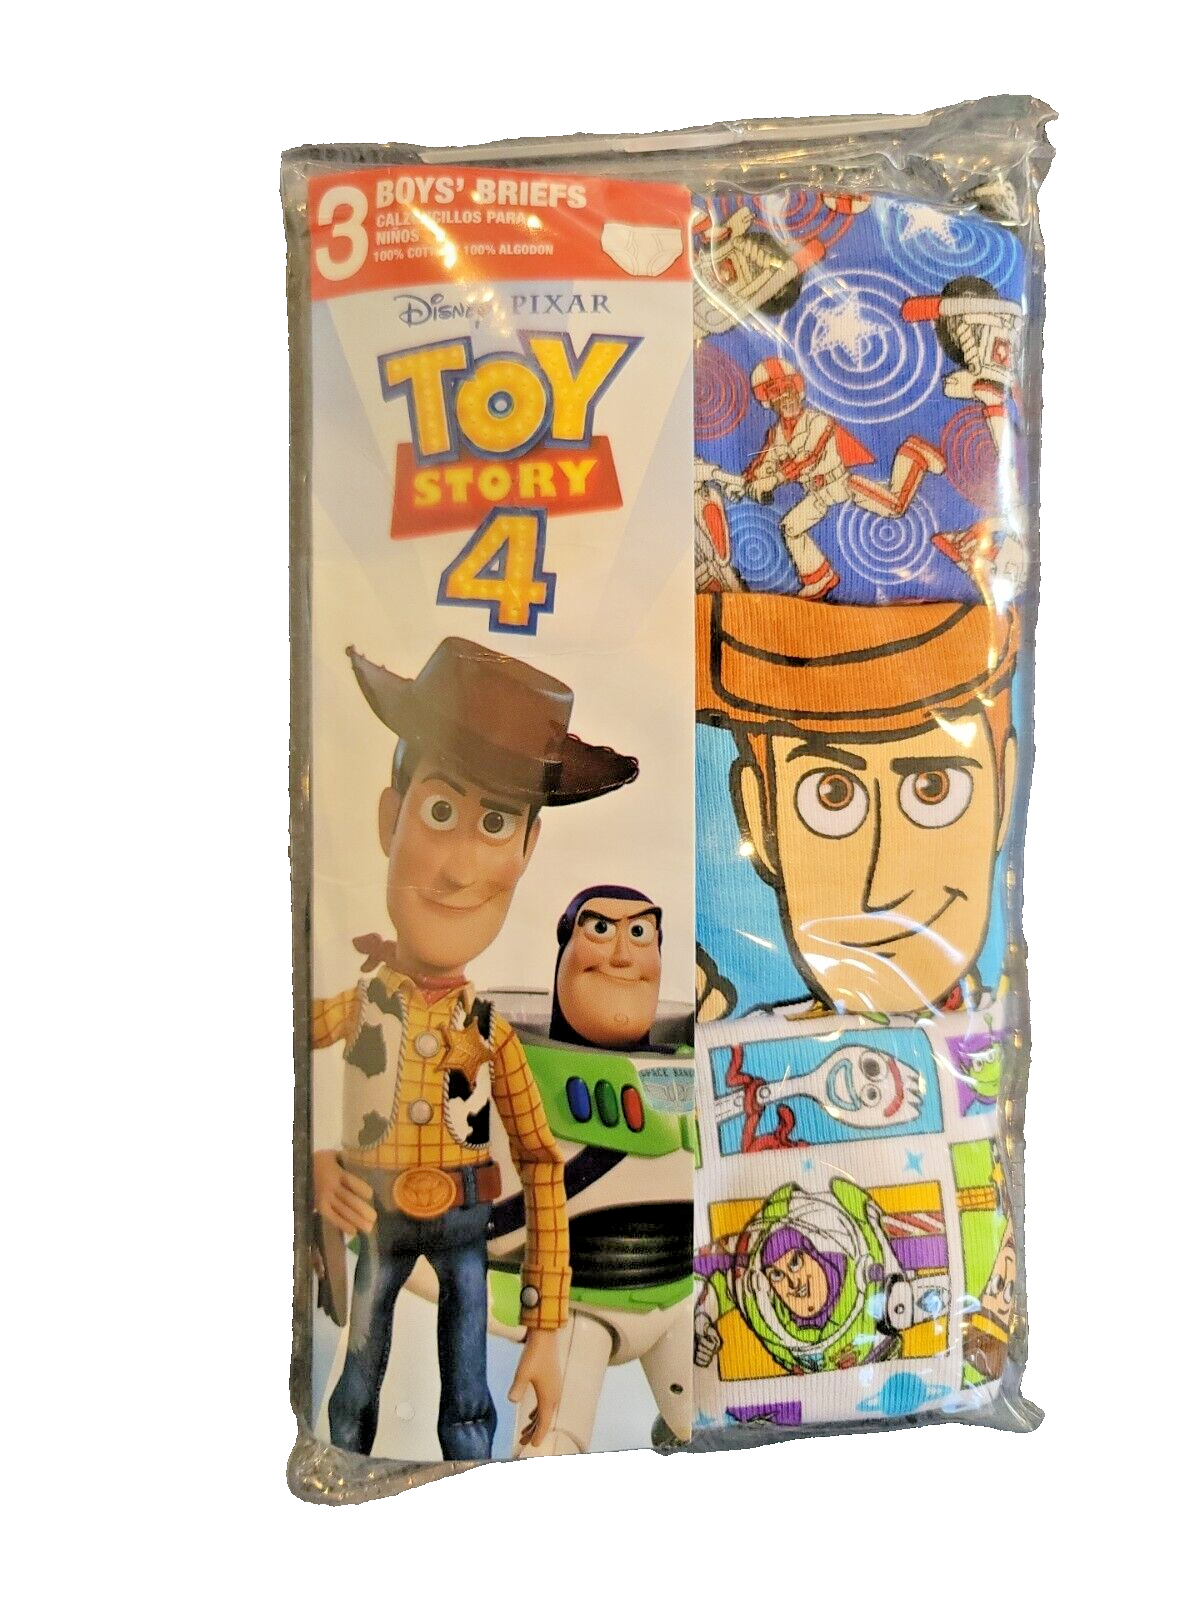 Primary image for Disney PIXAR Toy Story 4 Boys' Cotton Briefs | Size 6 | 3 Pack